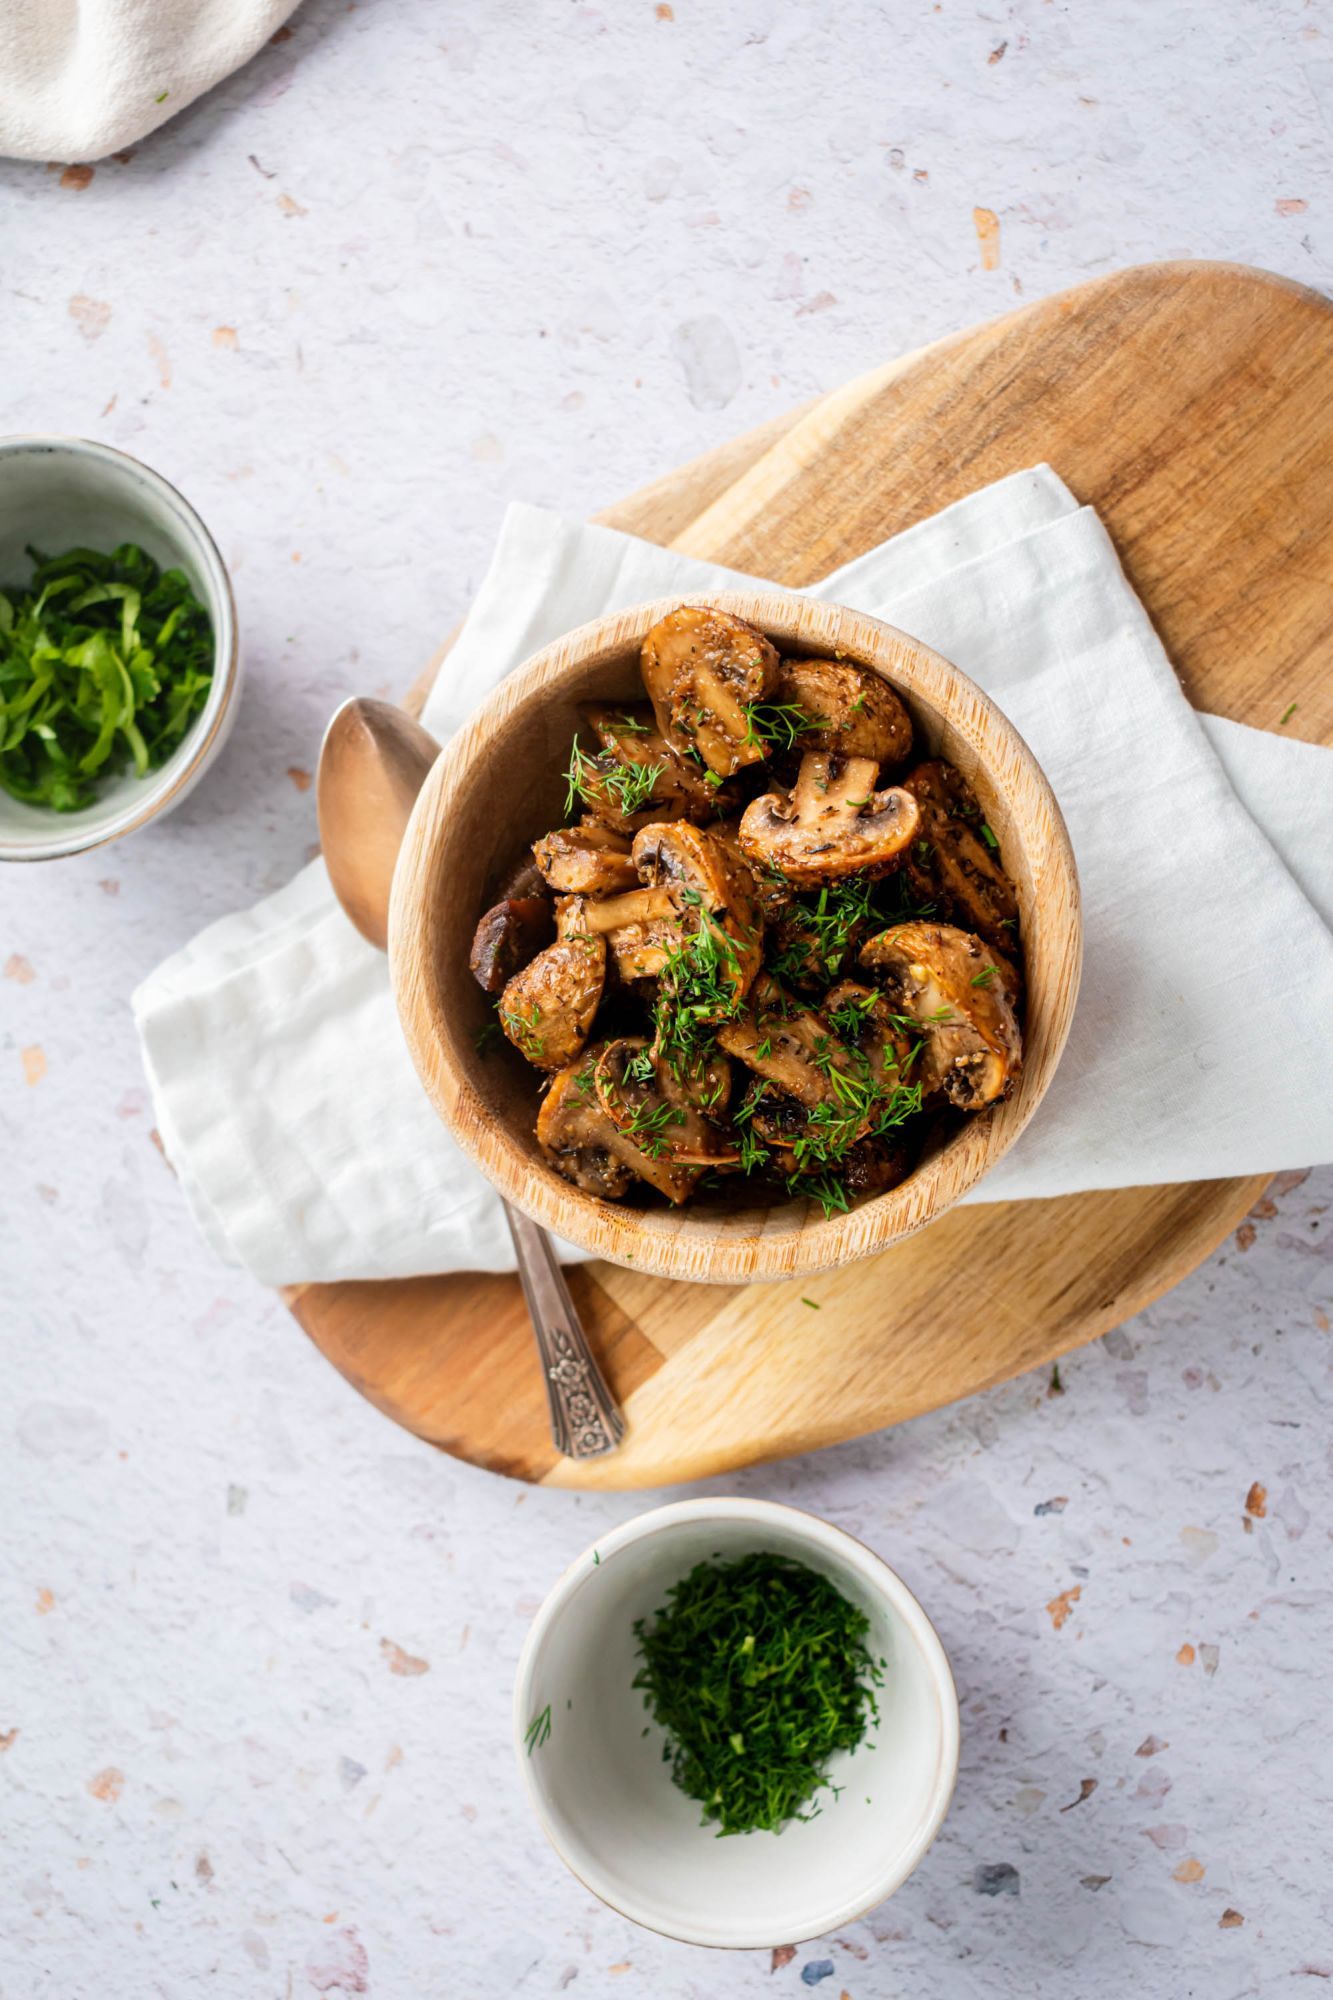 Balsamic roasted mushroom halves served in a bowl with fresh herbs.